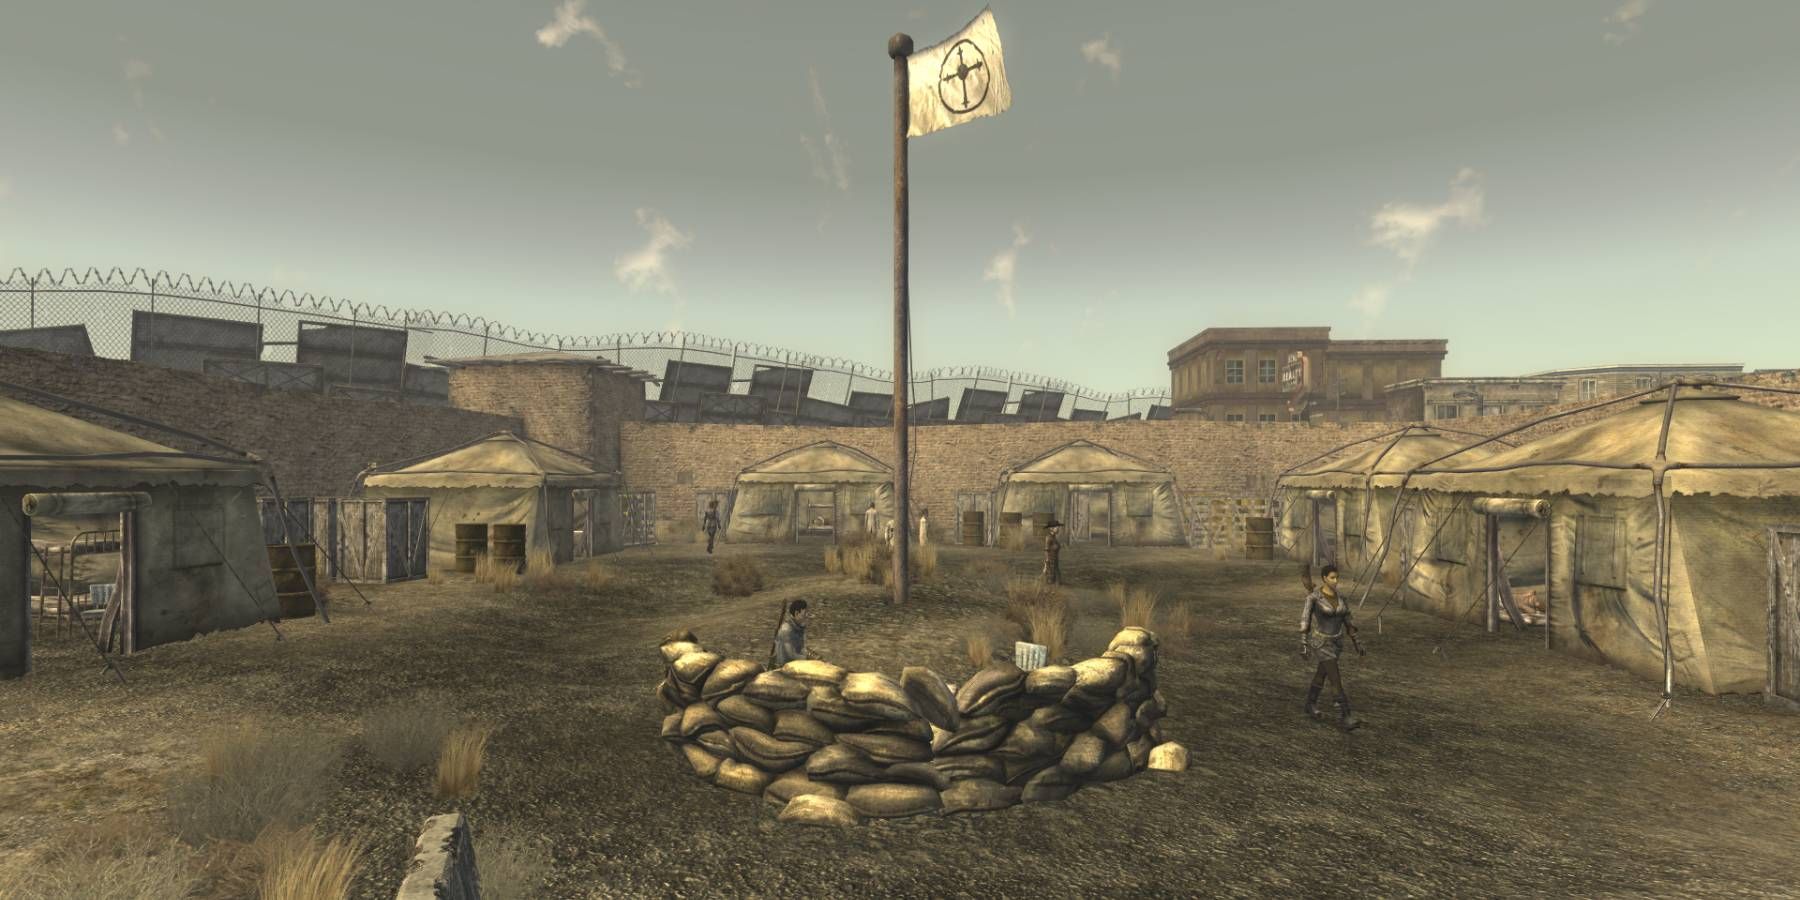 Followers of the Apocalypse camp at Old Mormon Fort in Fallout: New Vegas